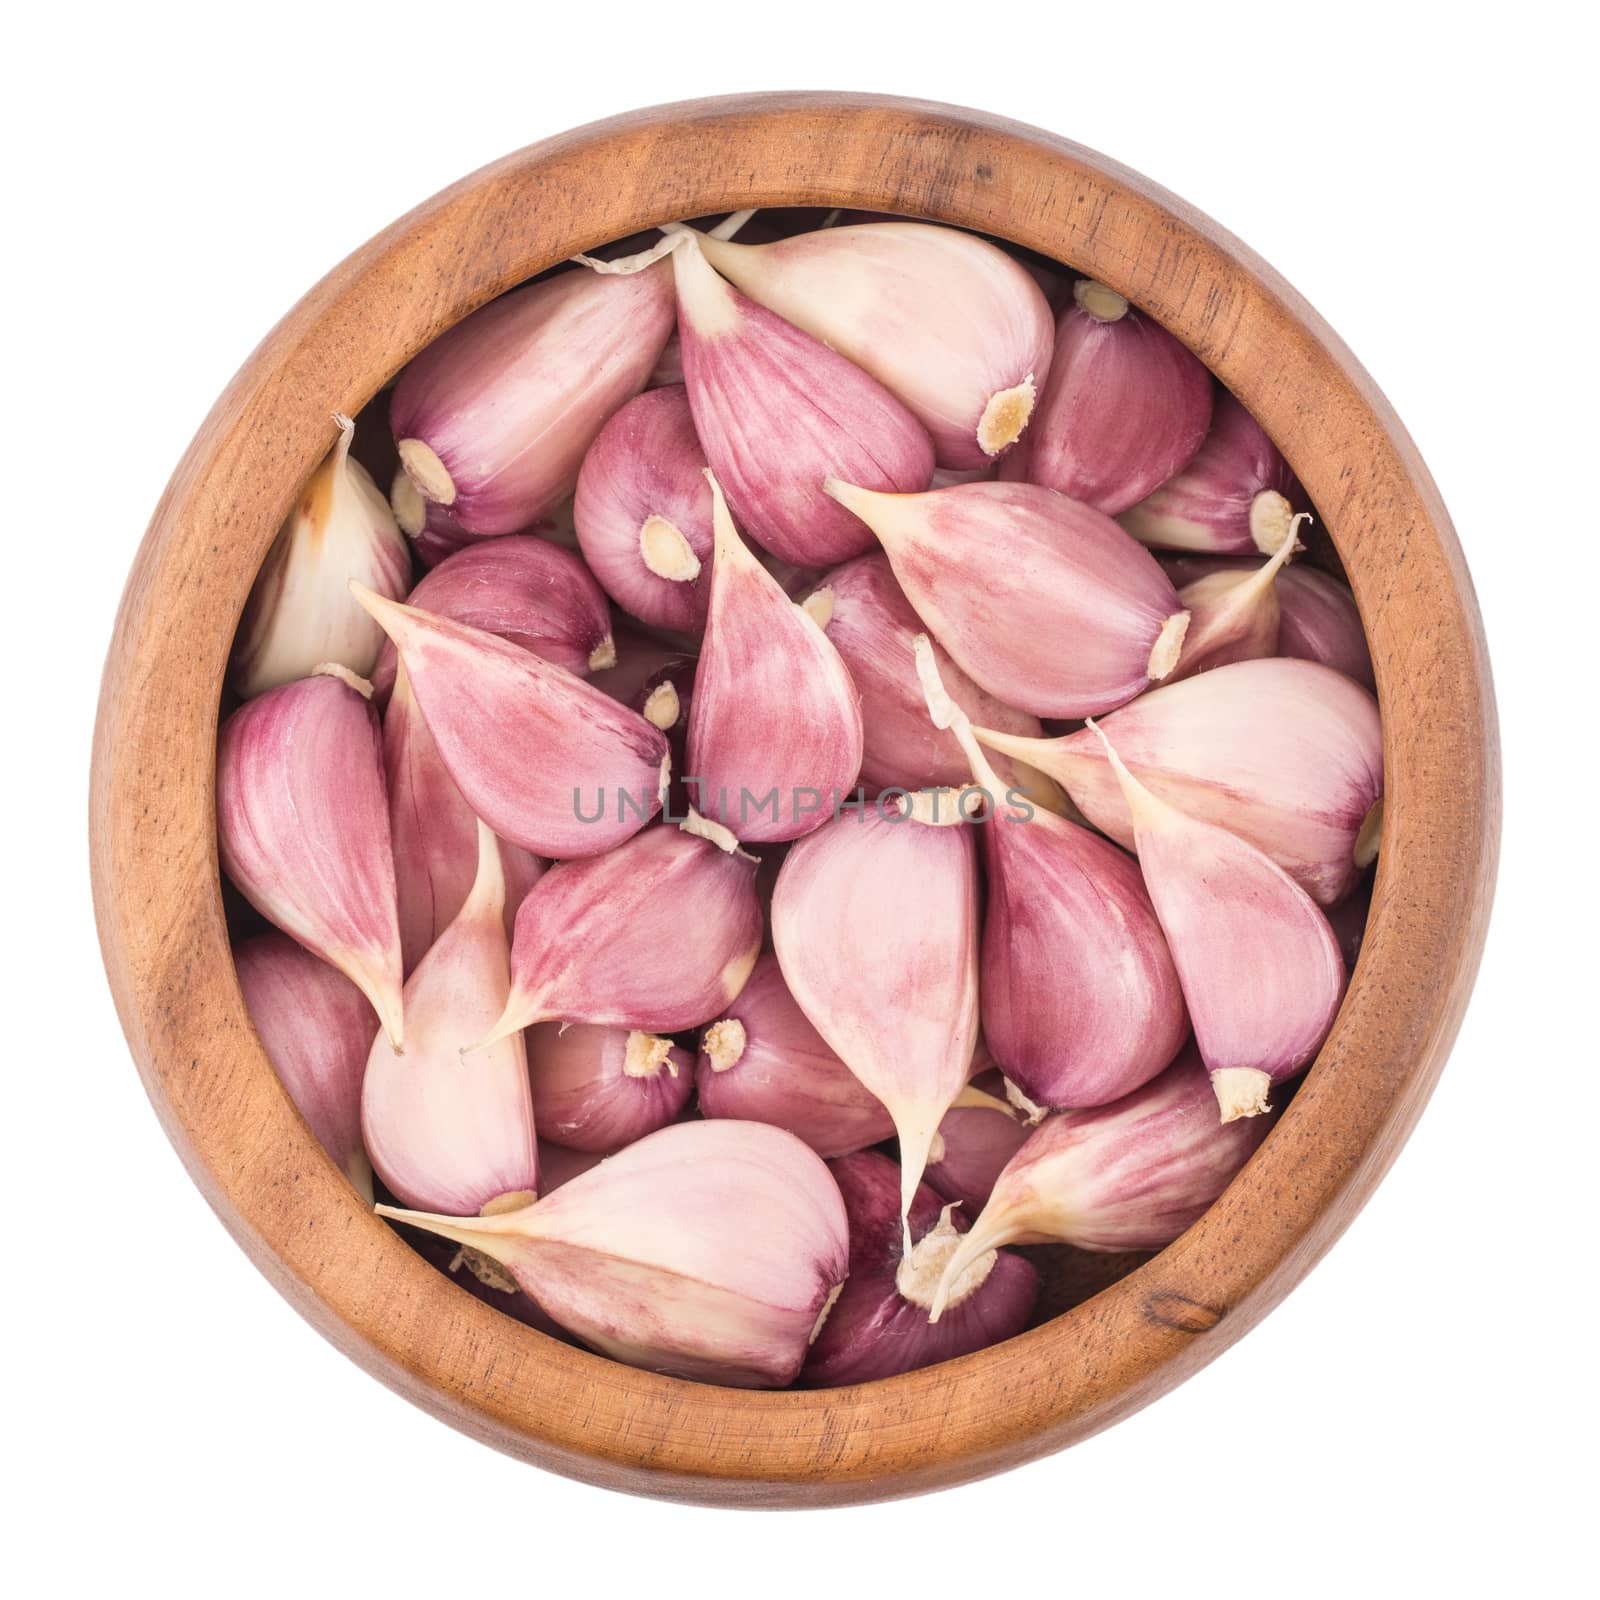 Garlic on wooden bowl top view of white background